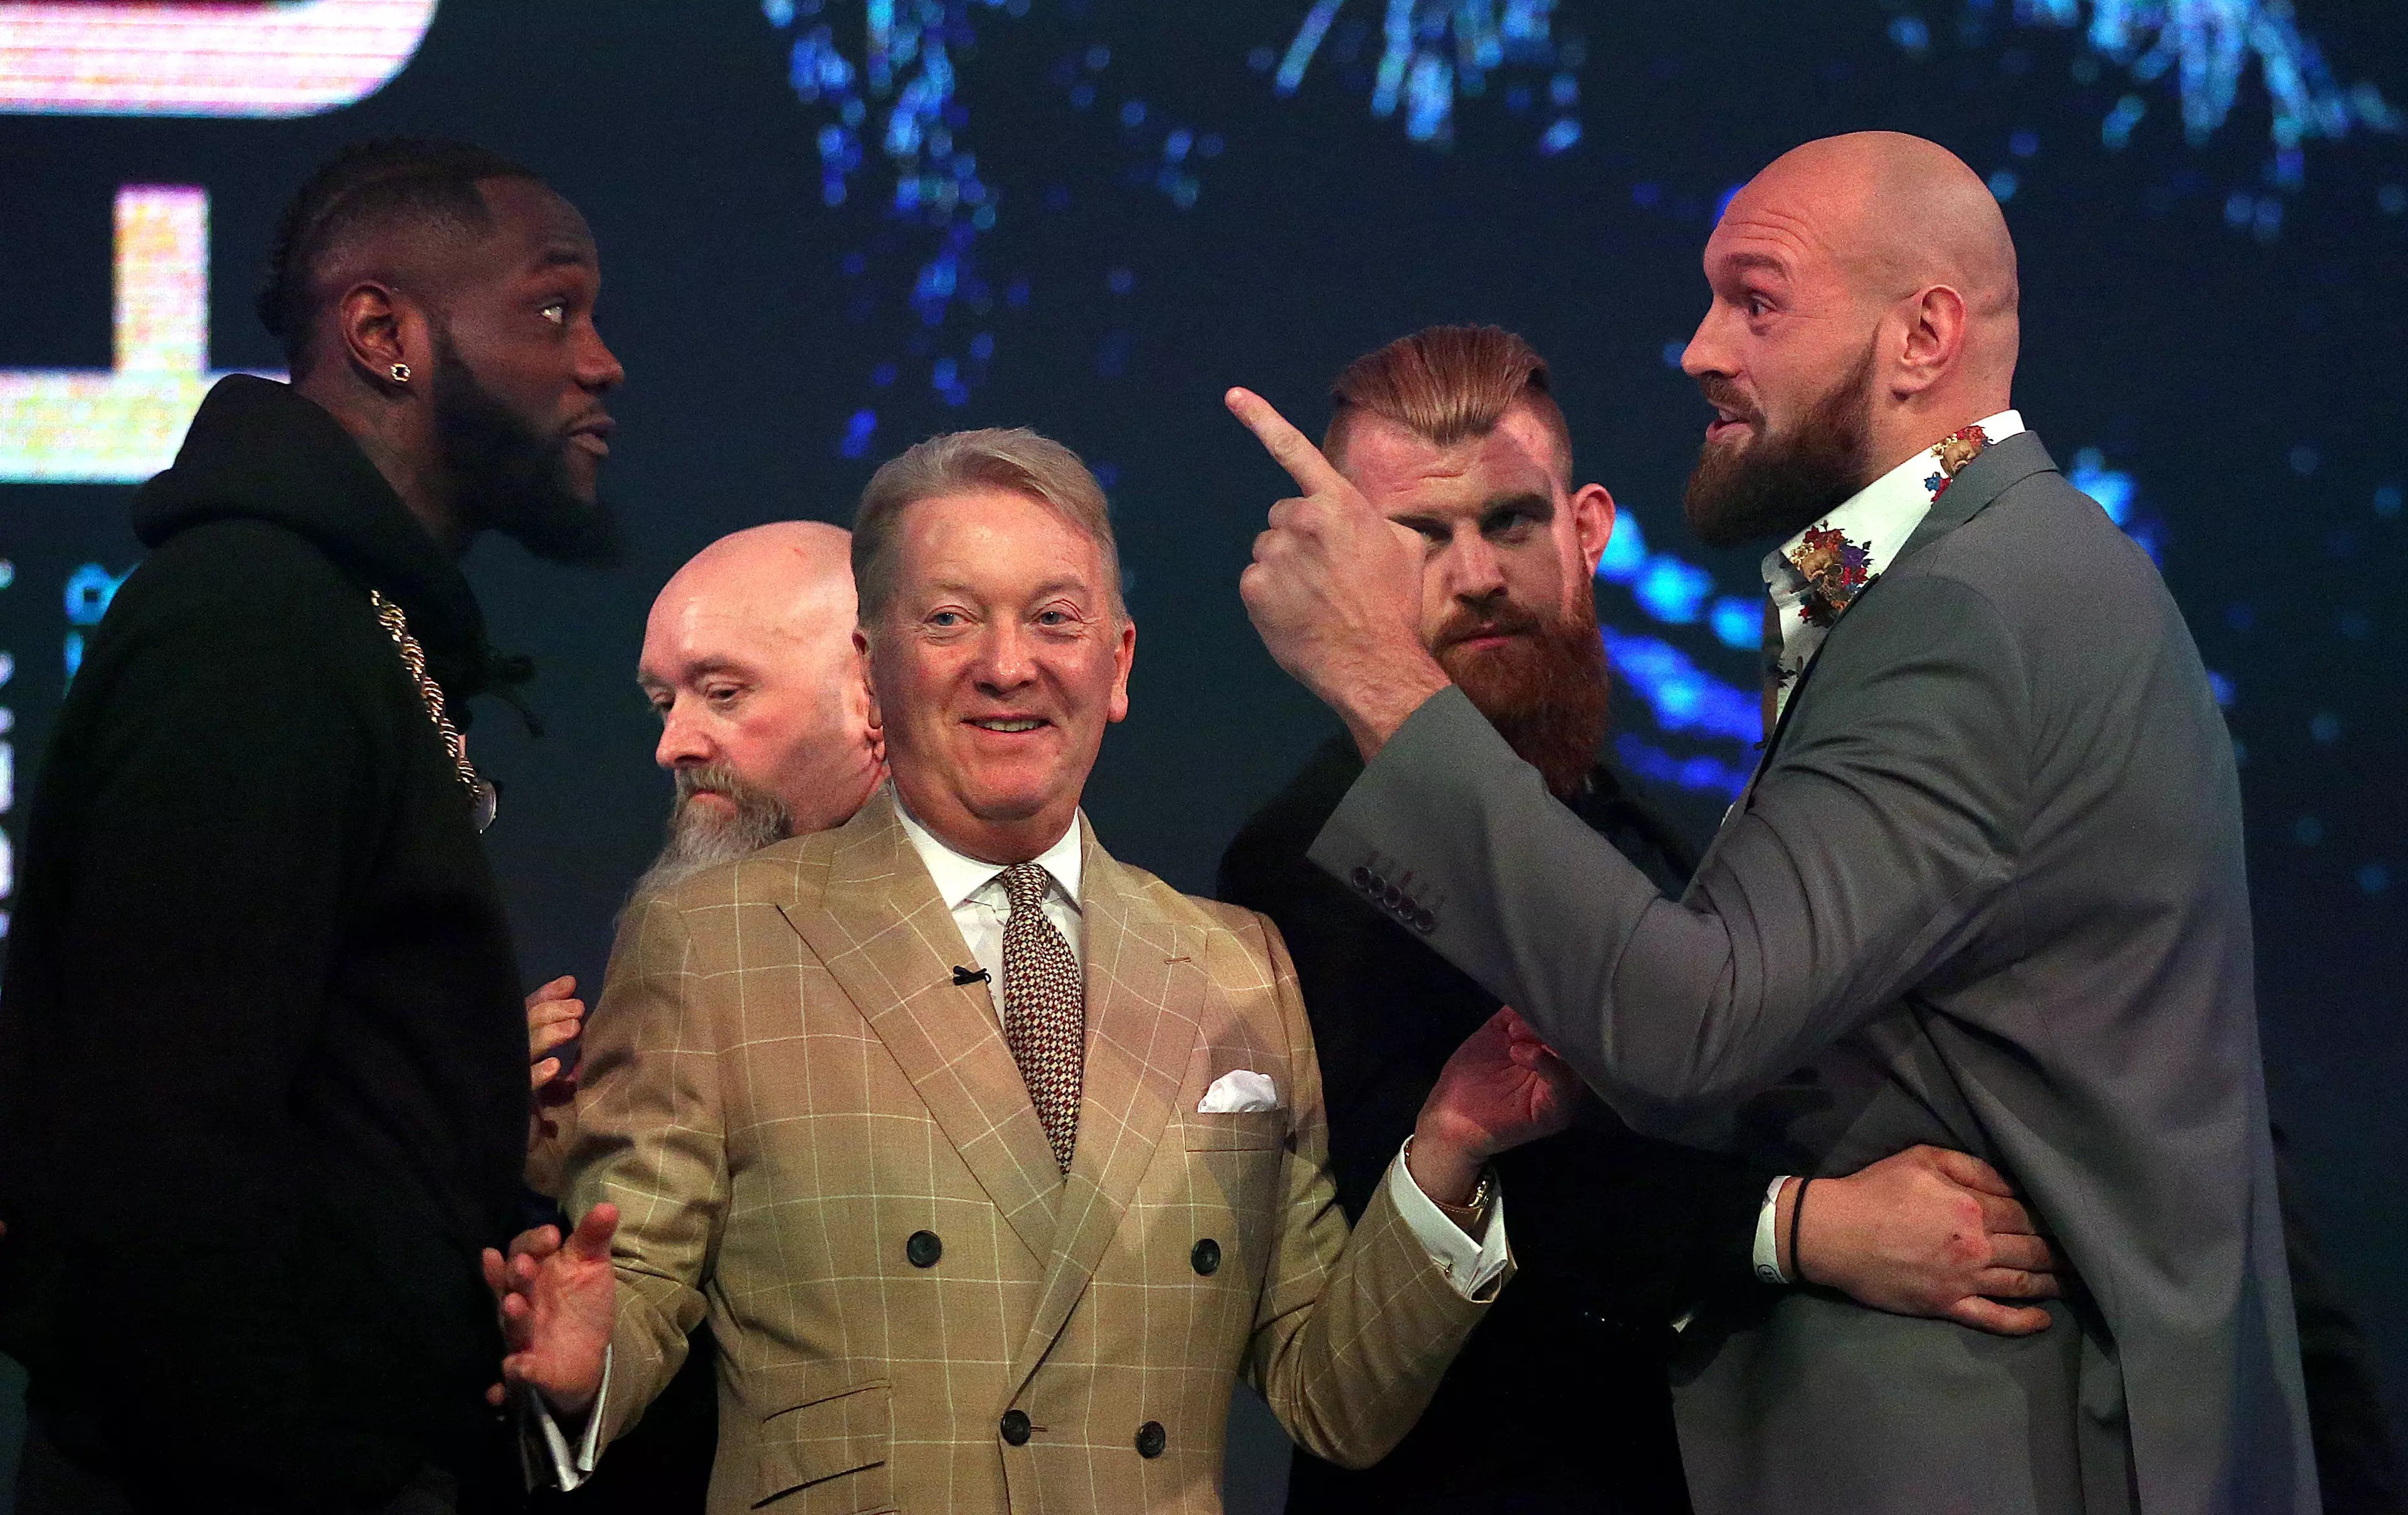 Wilder and Fury have clashed at the pre-fight engagements.